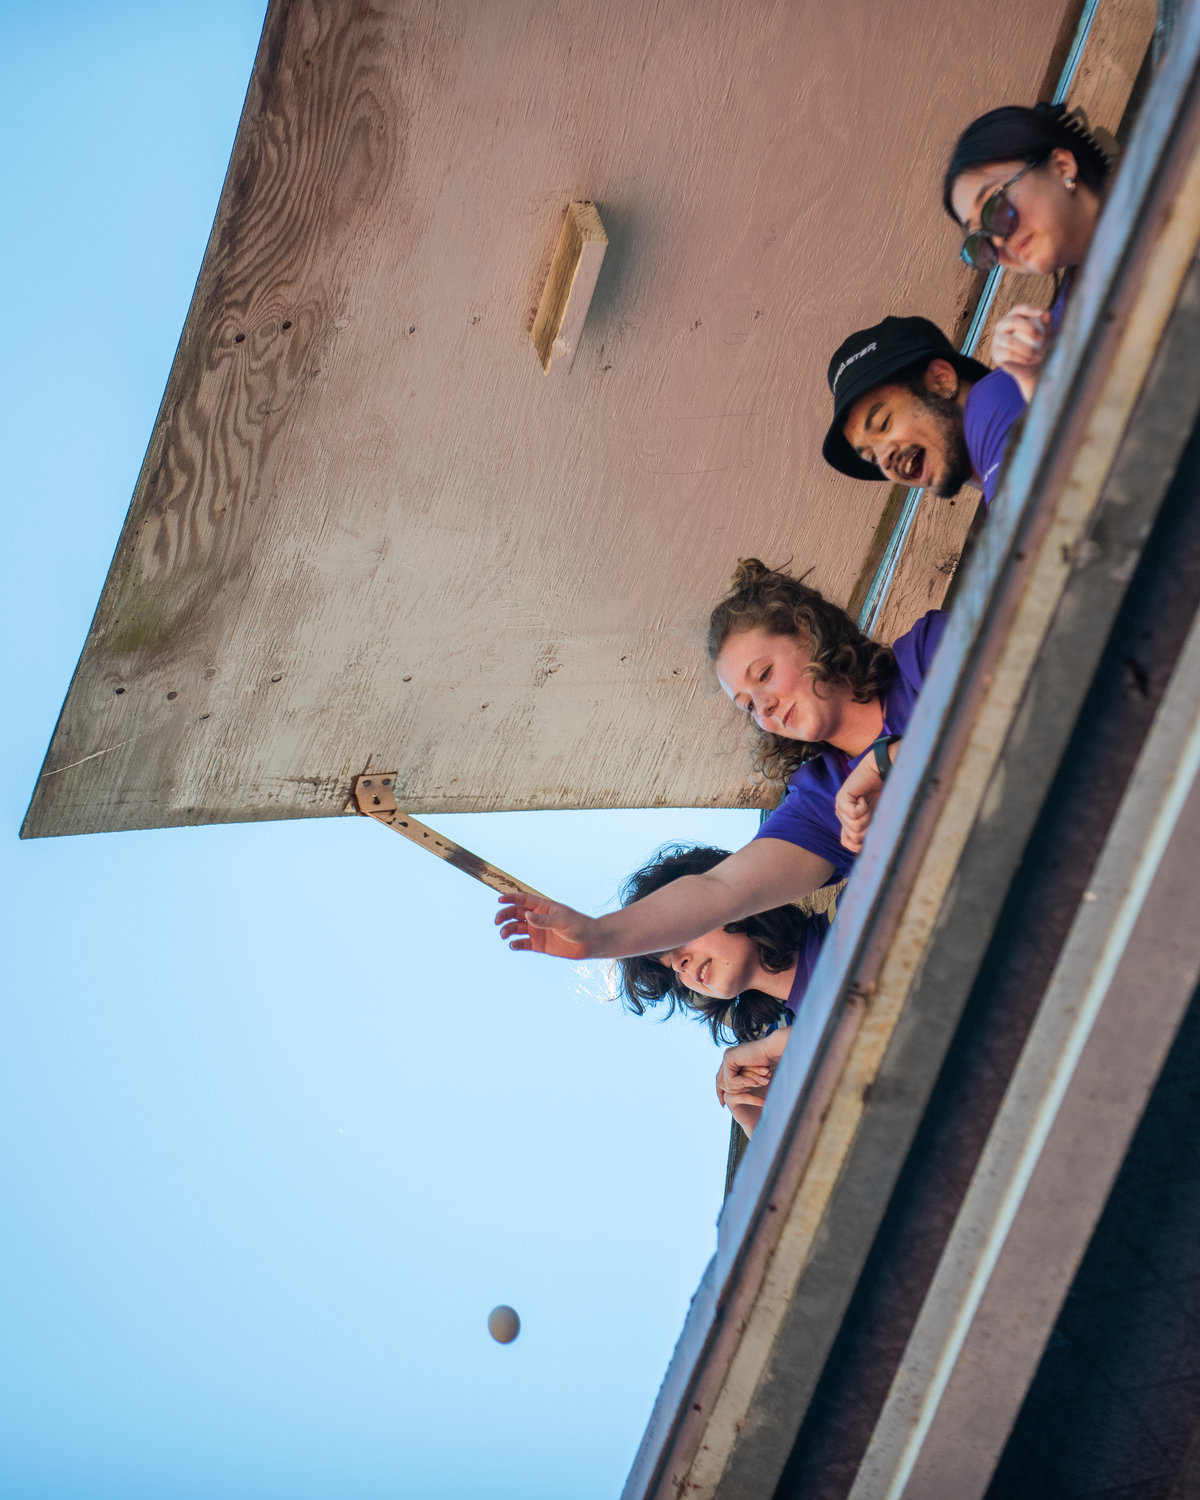 Grace O’Connor, a University of Washington staff member, smiles while dropping eggs from the press box above Bearcat Stadium Tuesday in Chehalis.